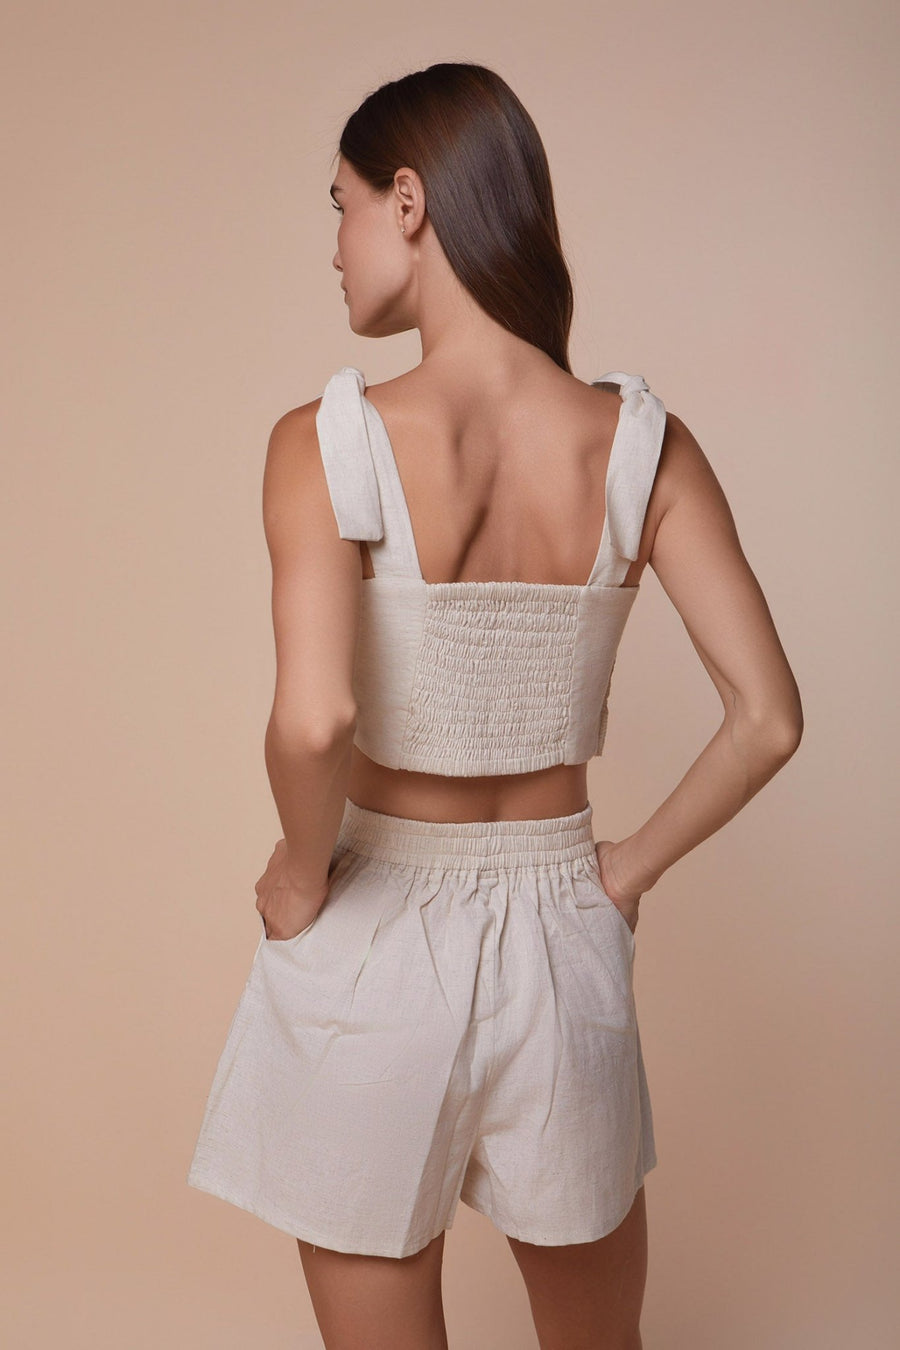 Asymmetrical Braided Embroidered top - nahlaelalfydesigns